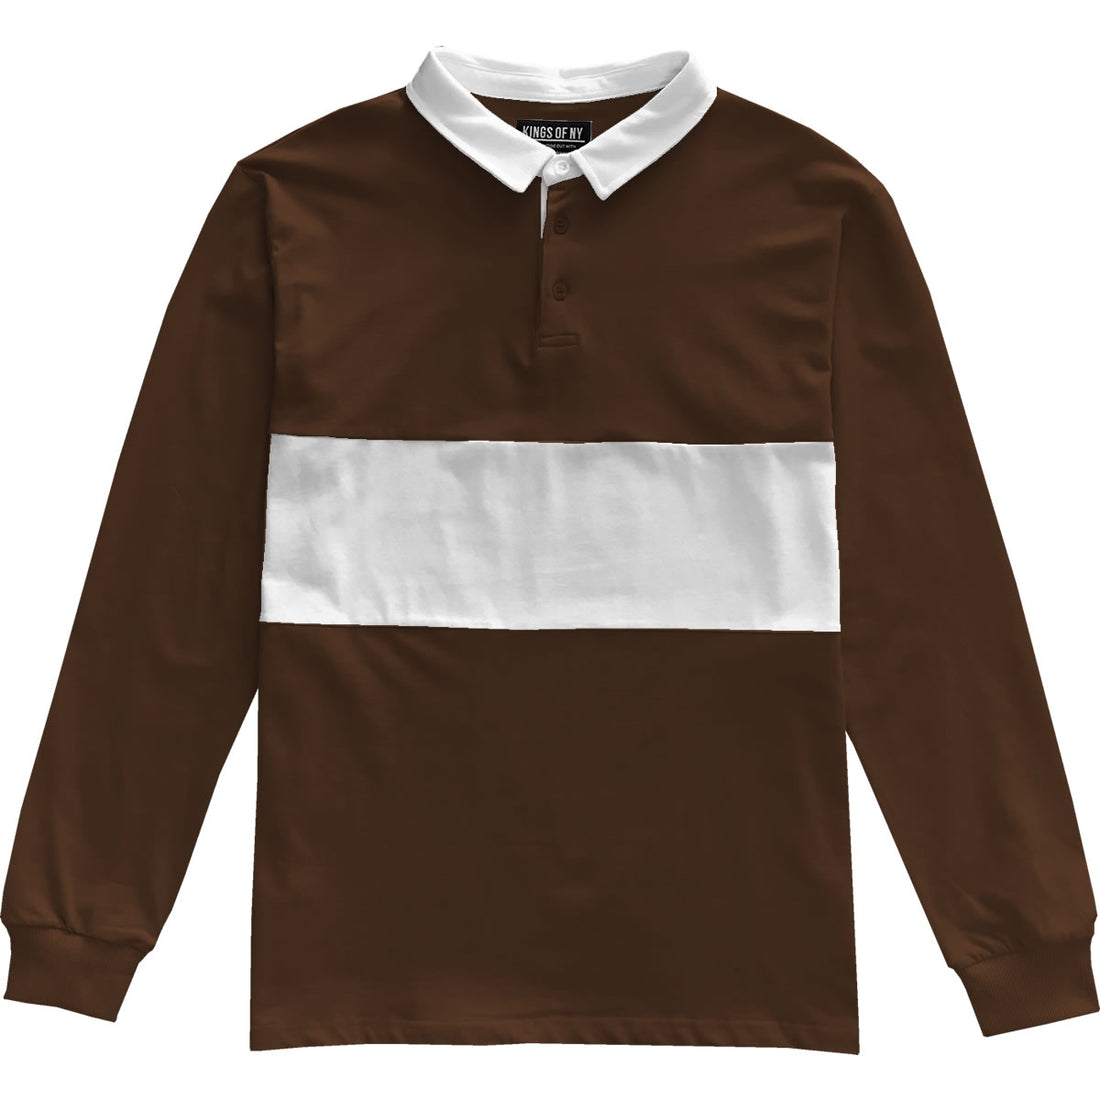 Mens Brown and White Striped Long Sleeve Polo Rugby Shirt